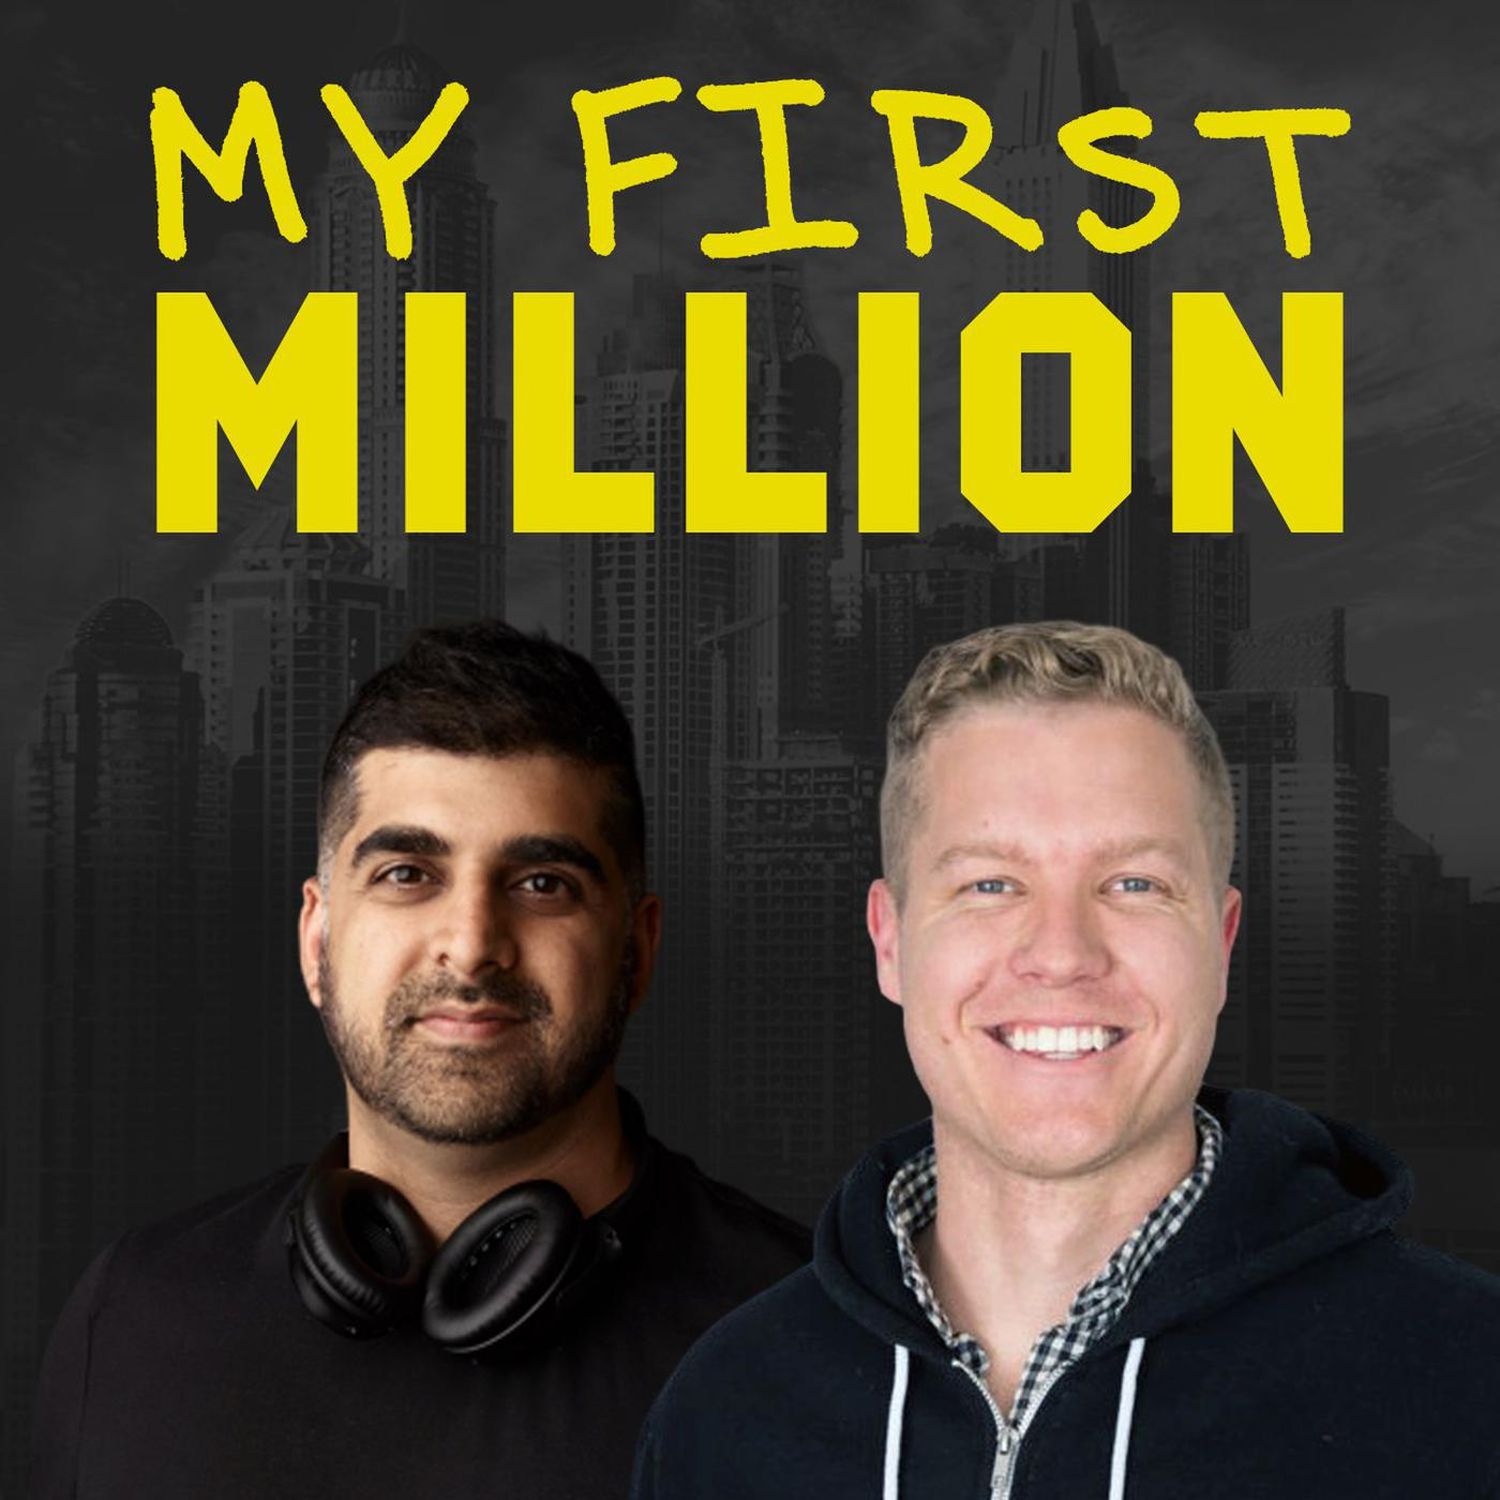 From Blogger To $100 Million Business With Neil Patel